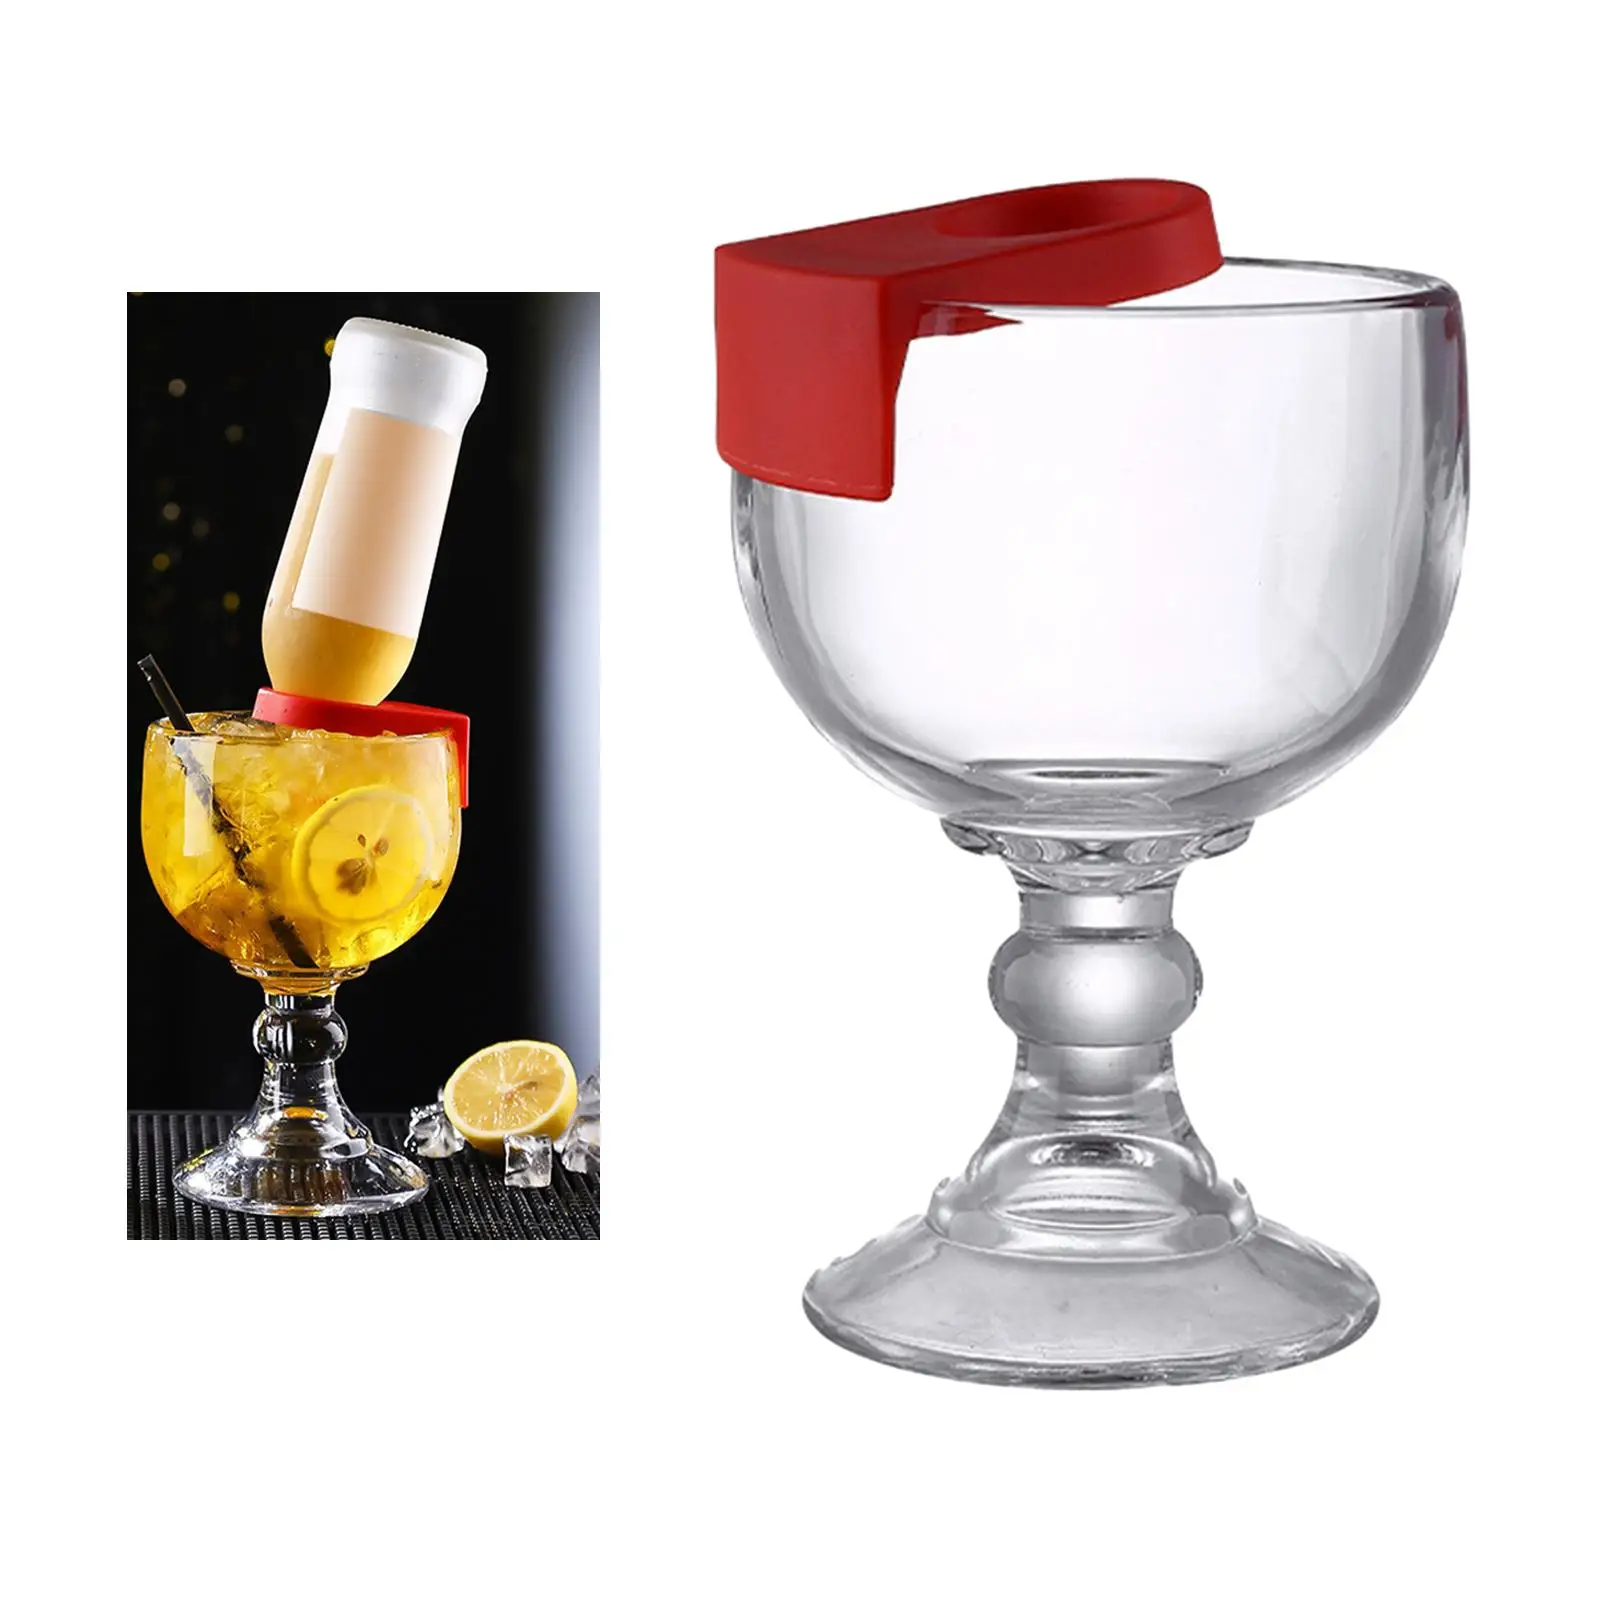 Martini Goblet Clear Drinking Cup Clasp Goblet Transparent Glasses Cup for KTV Club Birthday Celebrations Housewarming Gifts